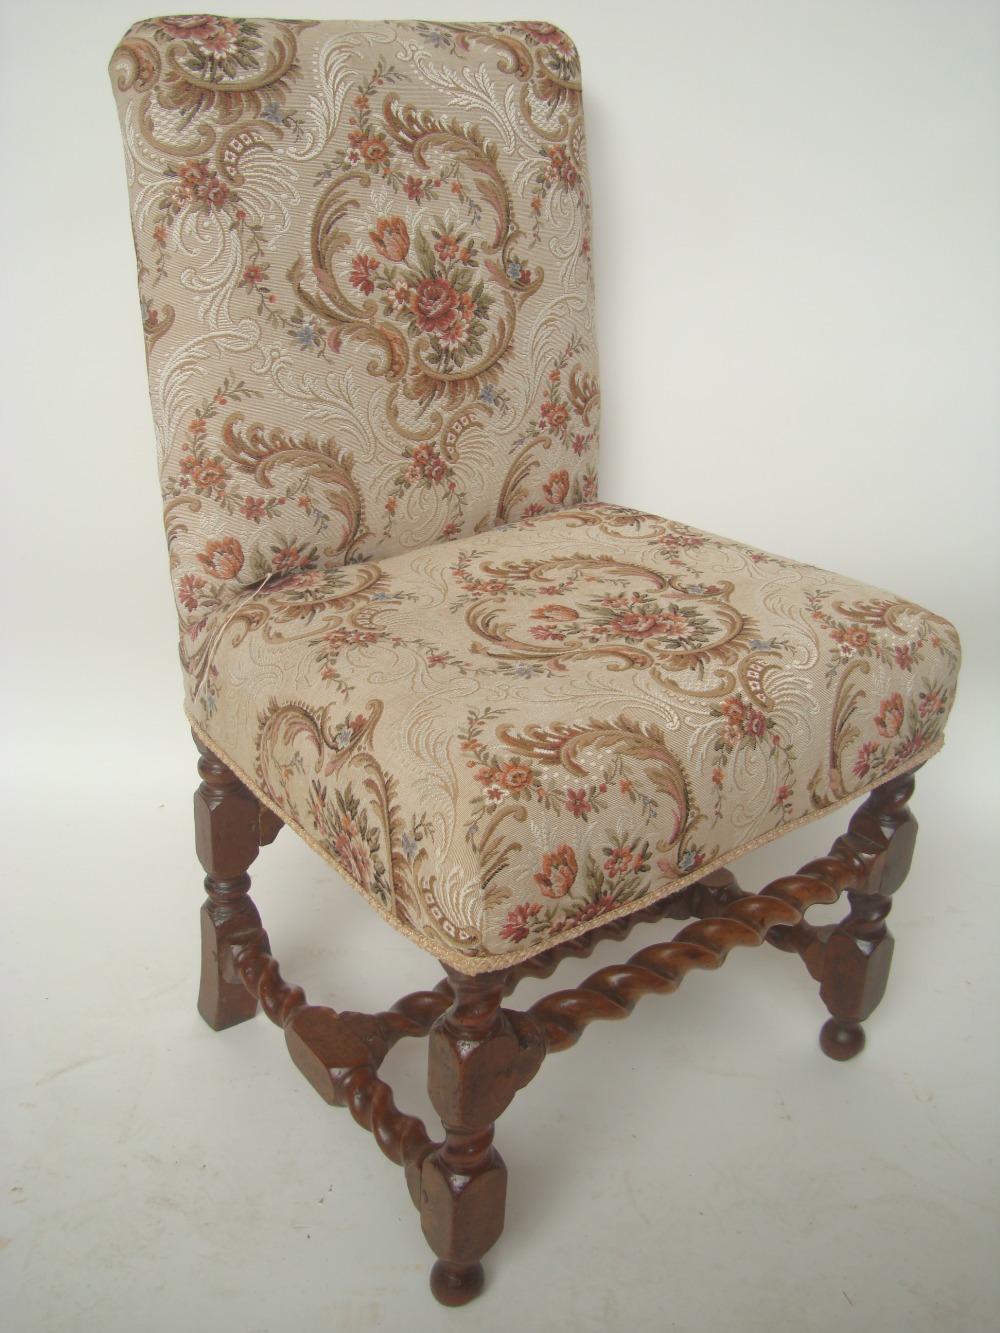 A late 17th/18th century French walnut side chair.
With upholstered back and stuff over seat on